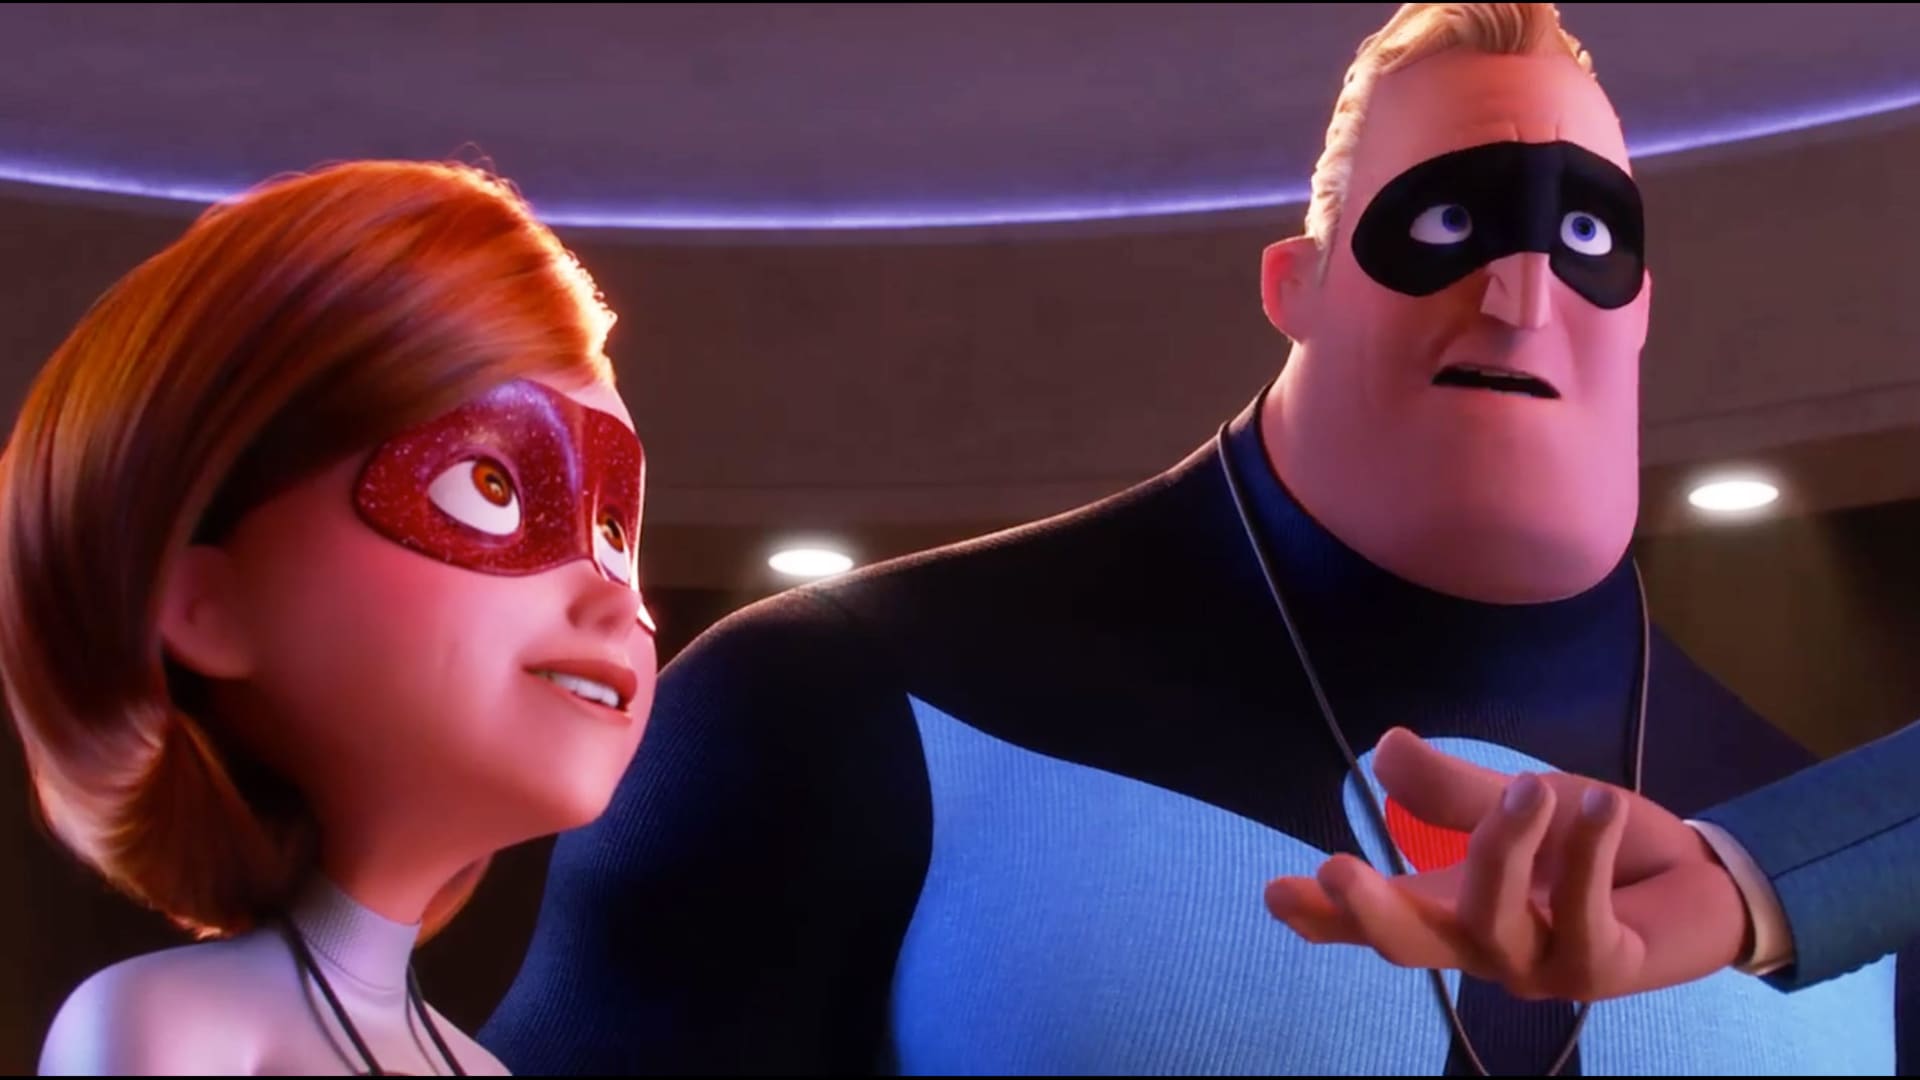 Incredibles 2' smashes animation record in open